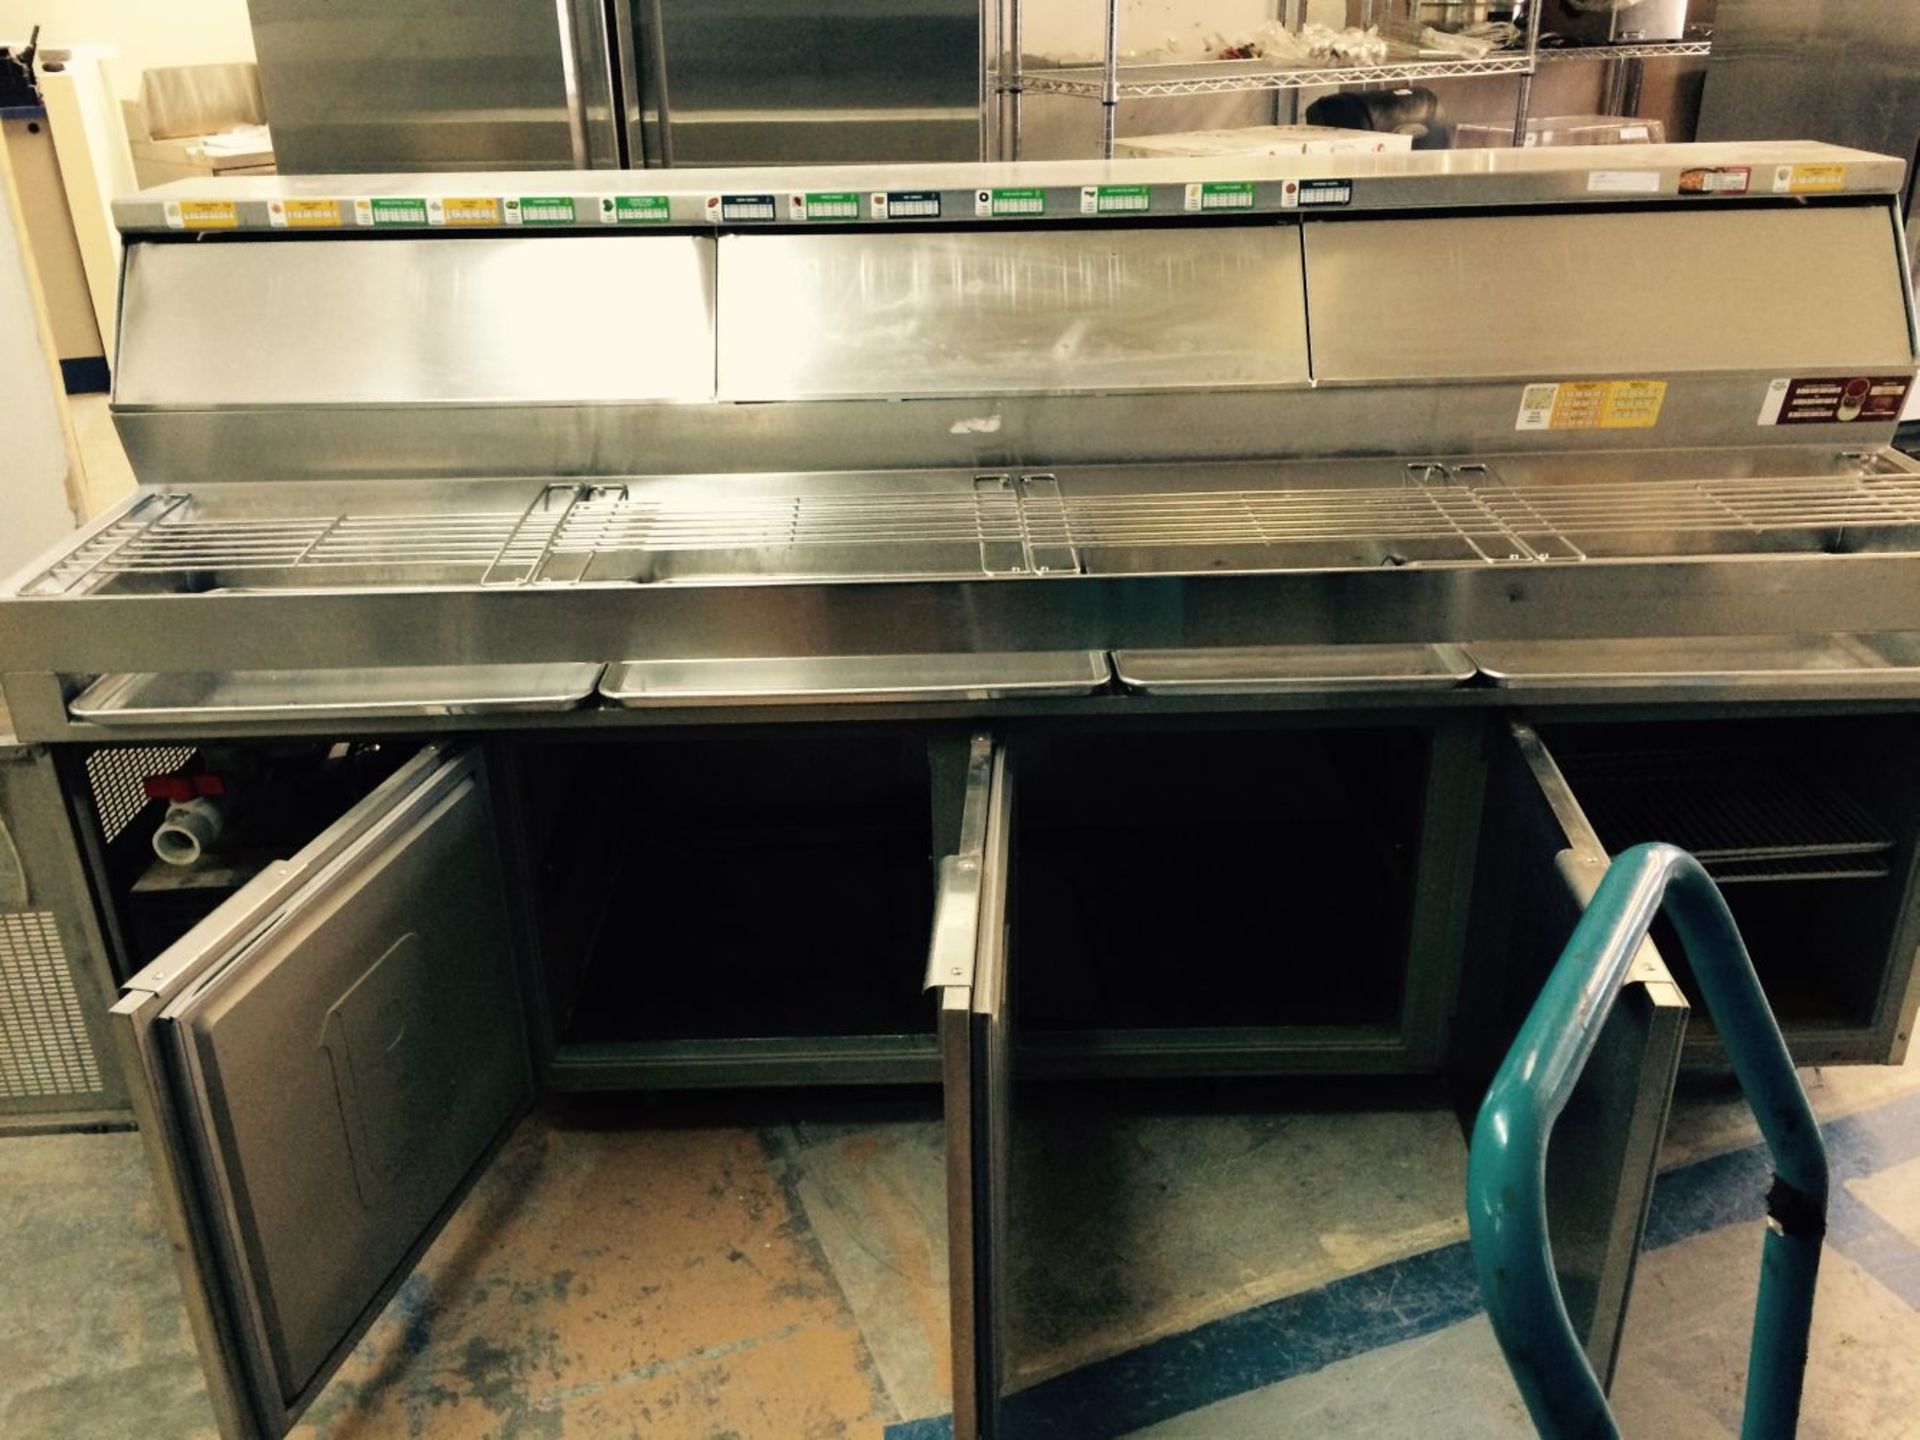 Randell Pizza Prep Table - Model DPM102L FOB Kelowna Contact Jerry For Details 604-808-5900 - Image 2 of 5